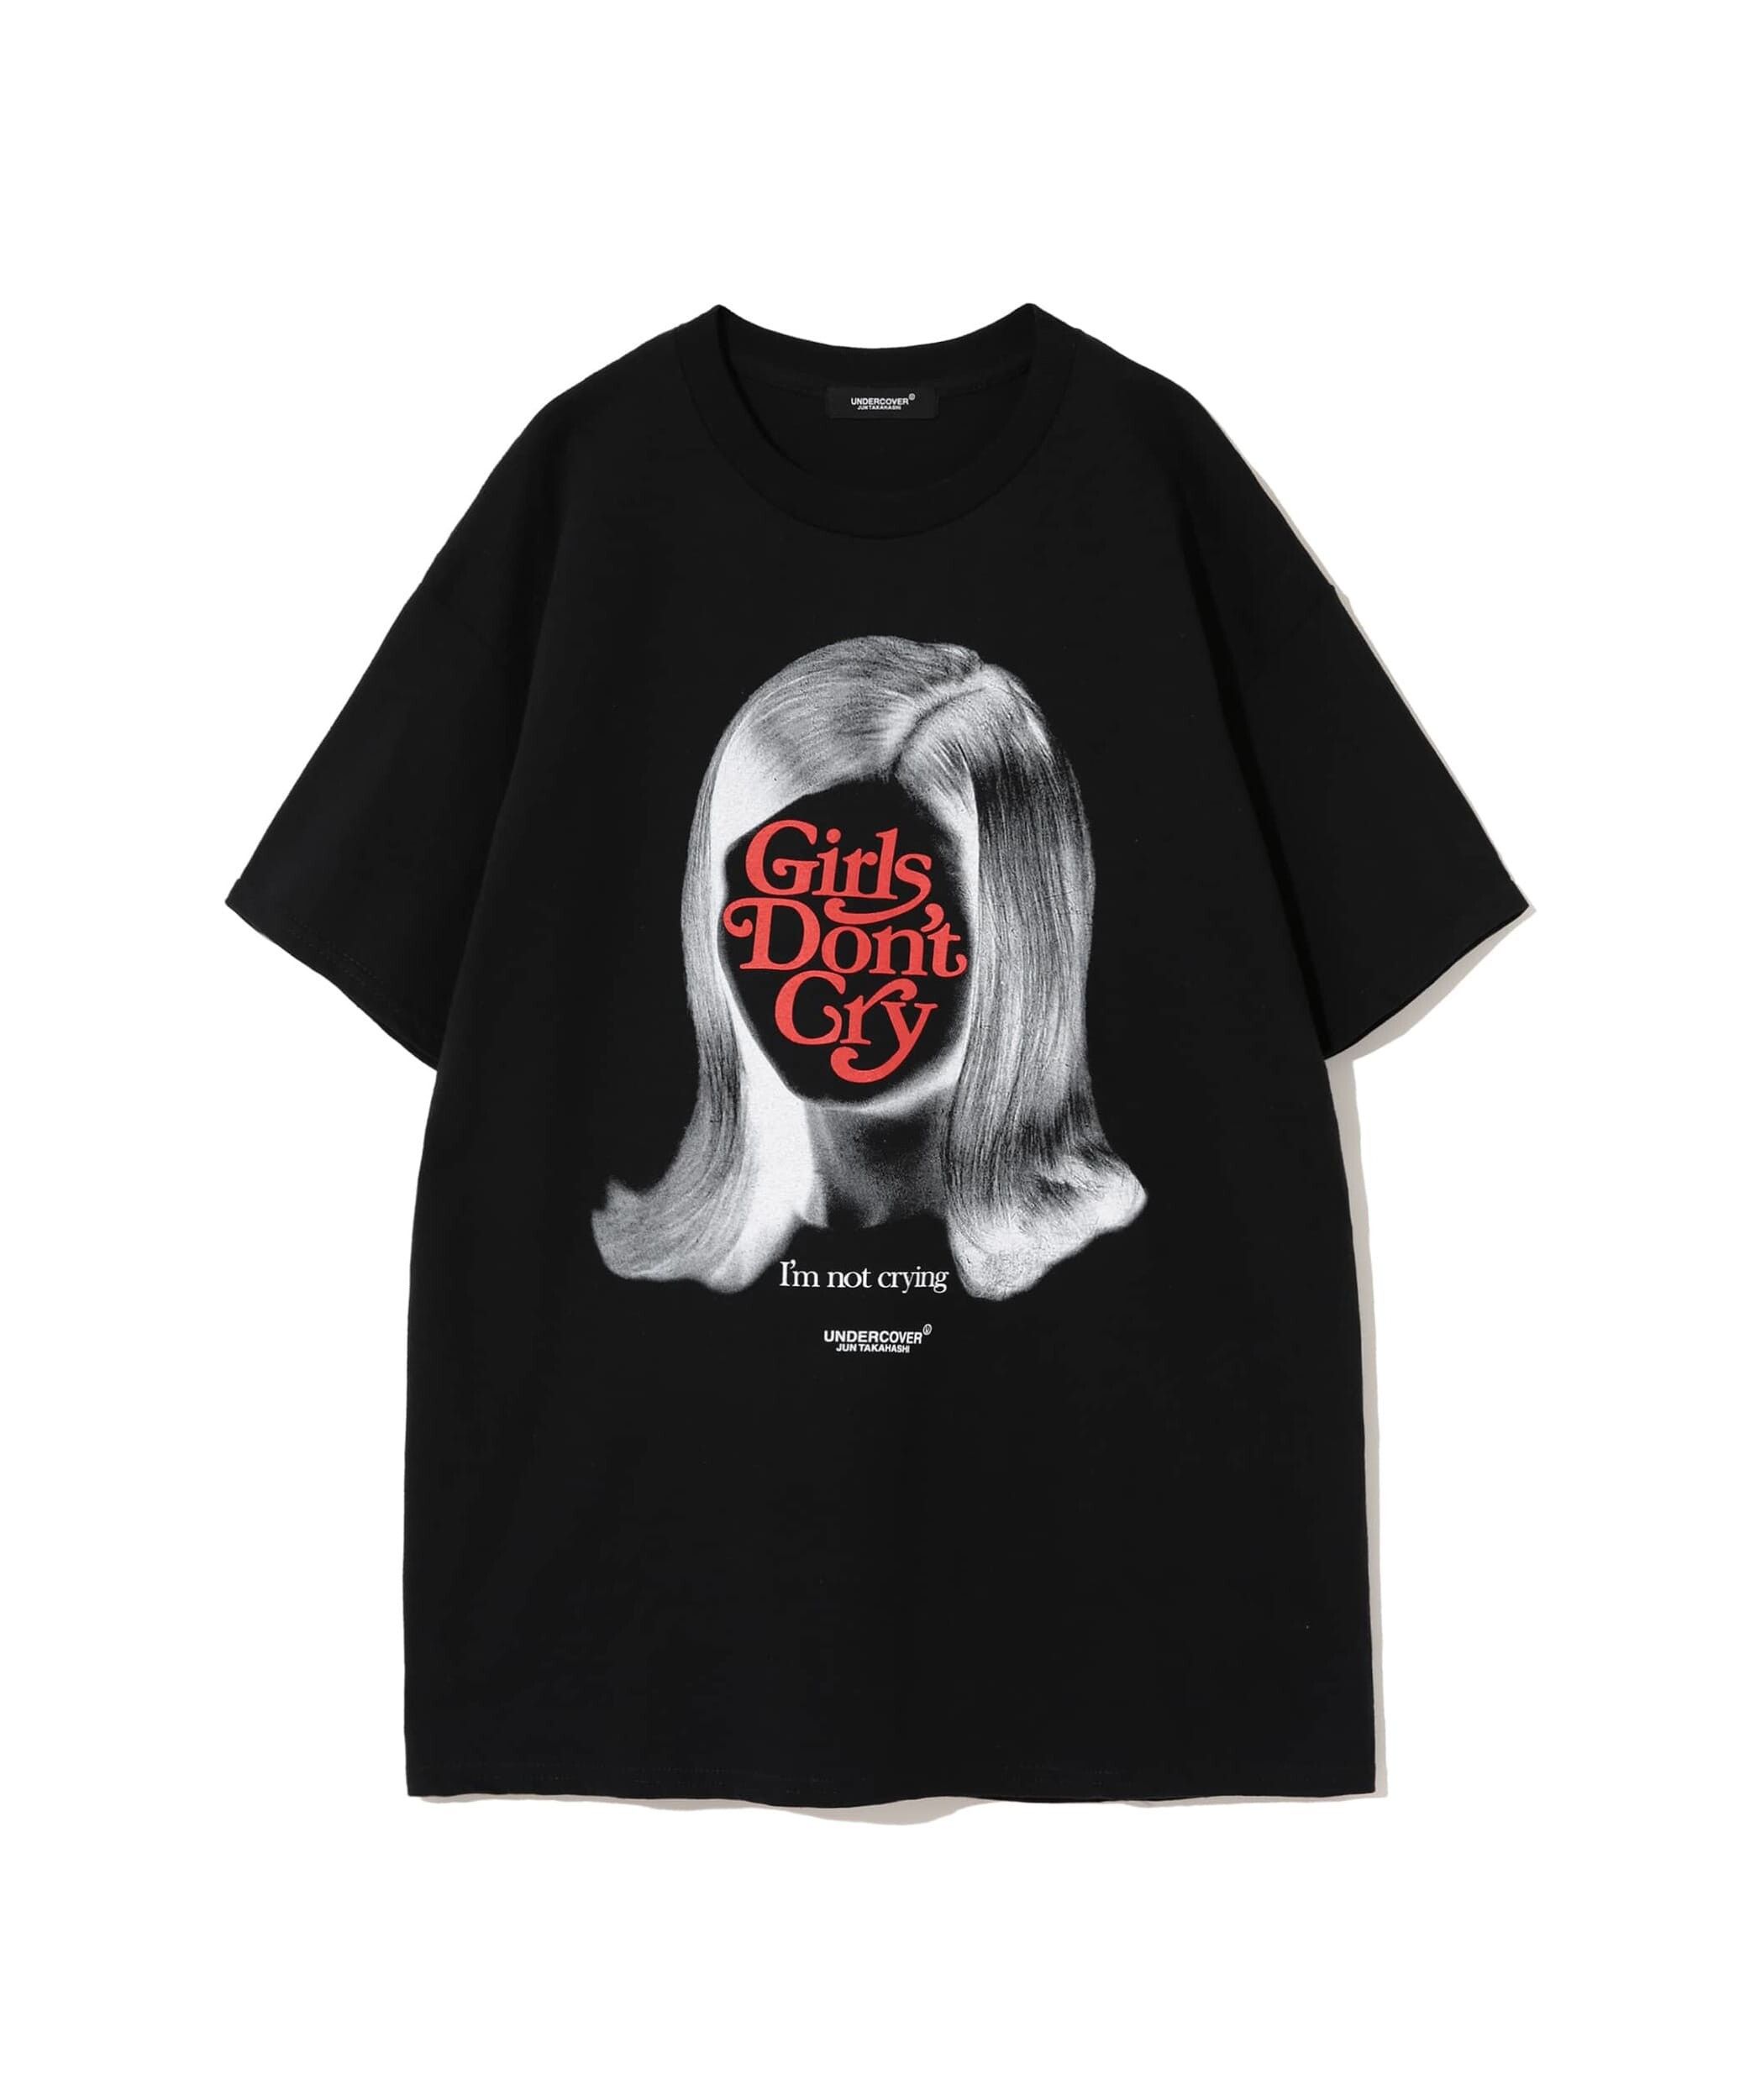 Undercover Girls Don't Cry x Undercover T-Shirt COMPLEXCON EXCLUSIVE |  Grailed